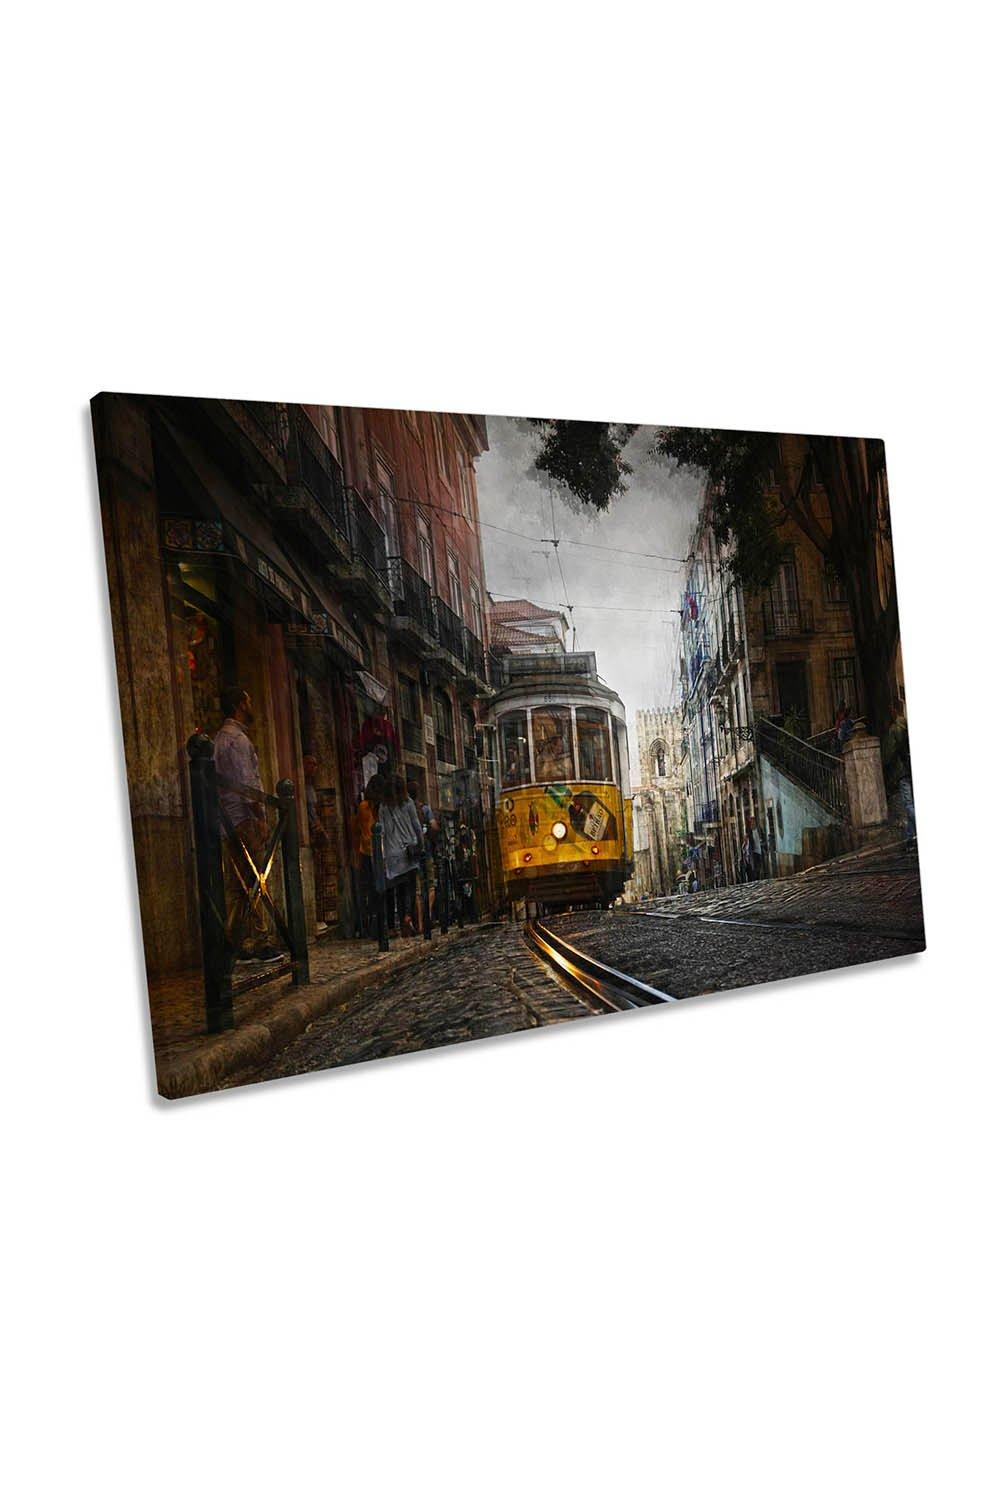 The Exciting Lisbon Tram City Abstract Canvas Wall Art Picture Print